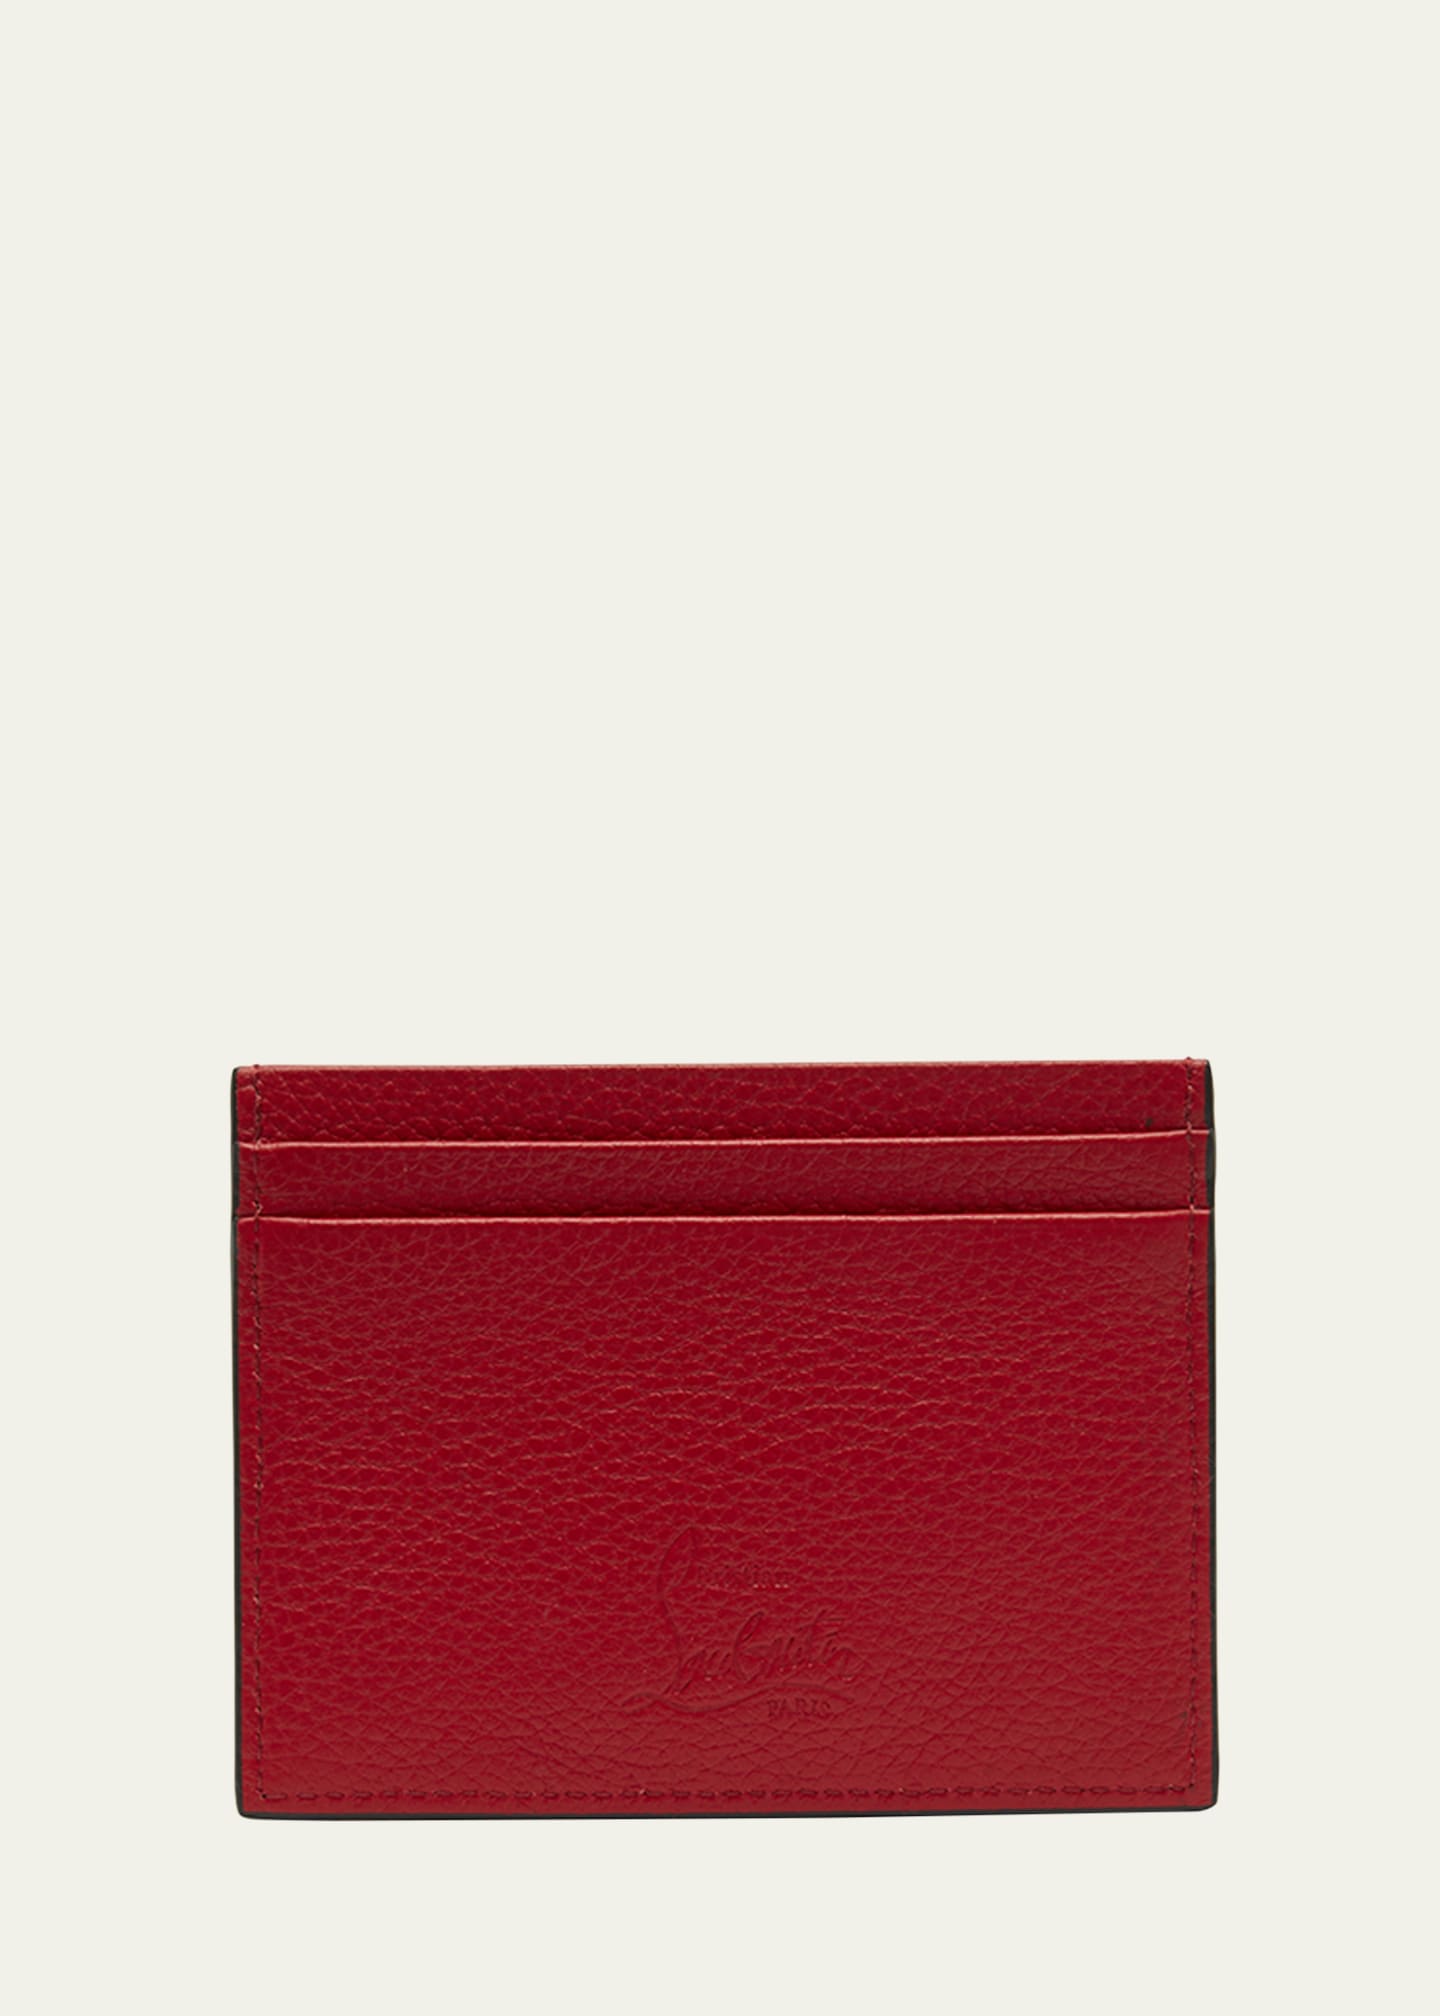 Christian Louboutin Wallets and cardholders for Men